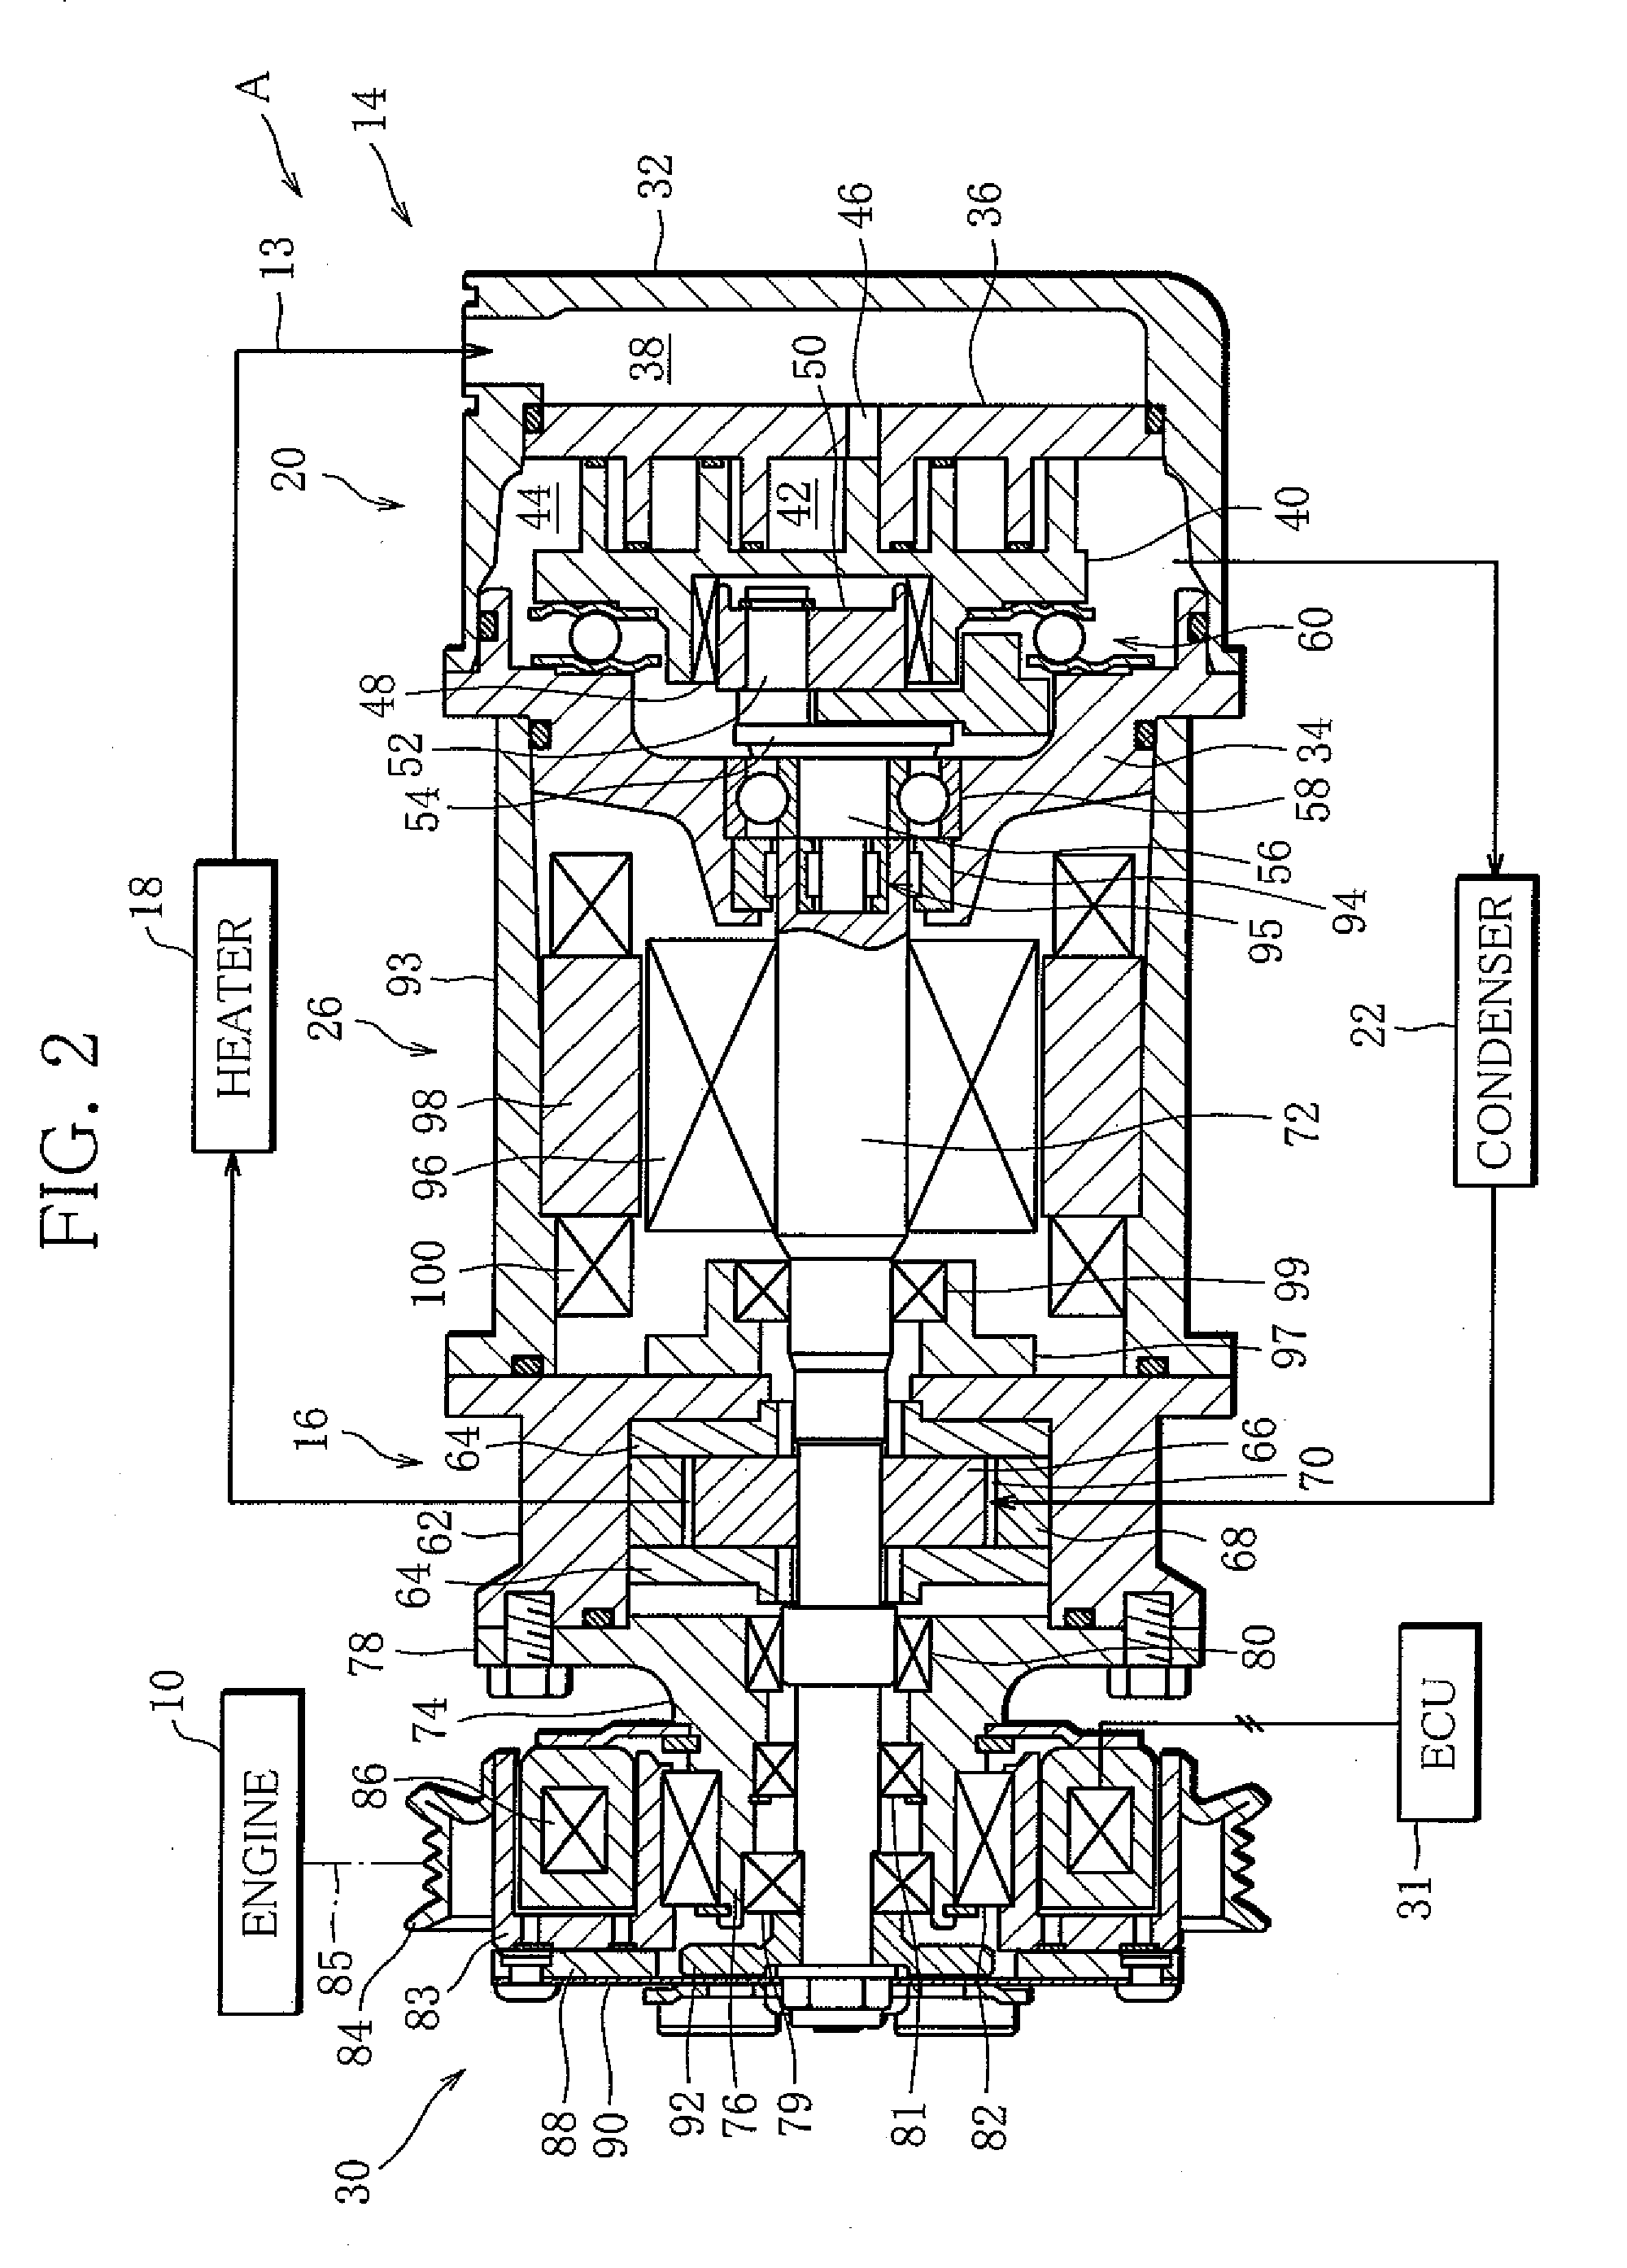 Fluid Machine, Rankine Circuit, and System for Utilizing Waste Heat from Vehicle